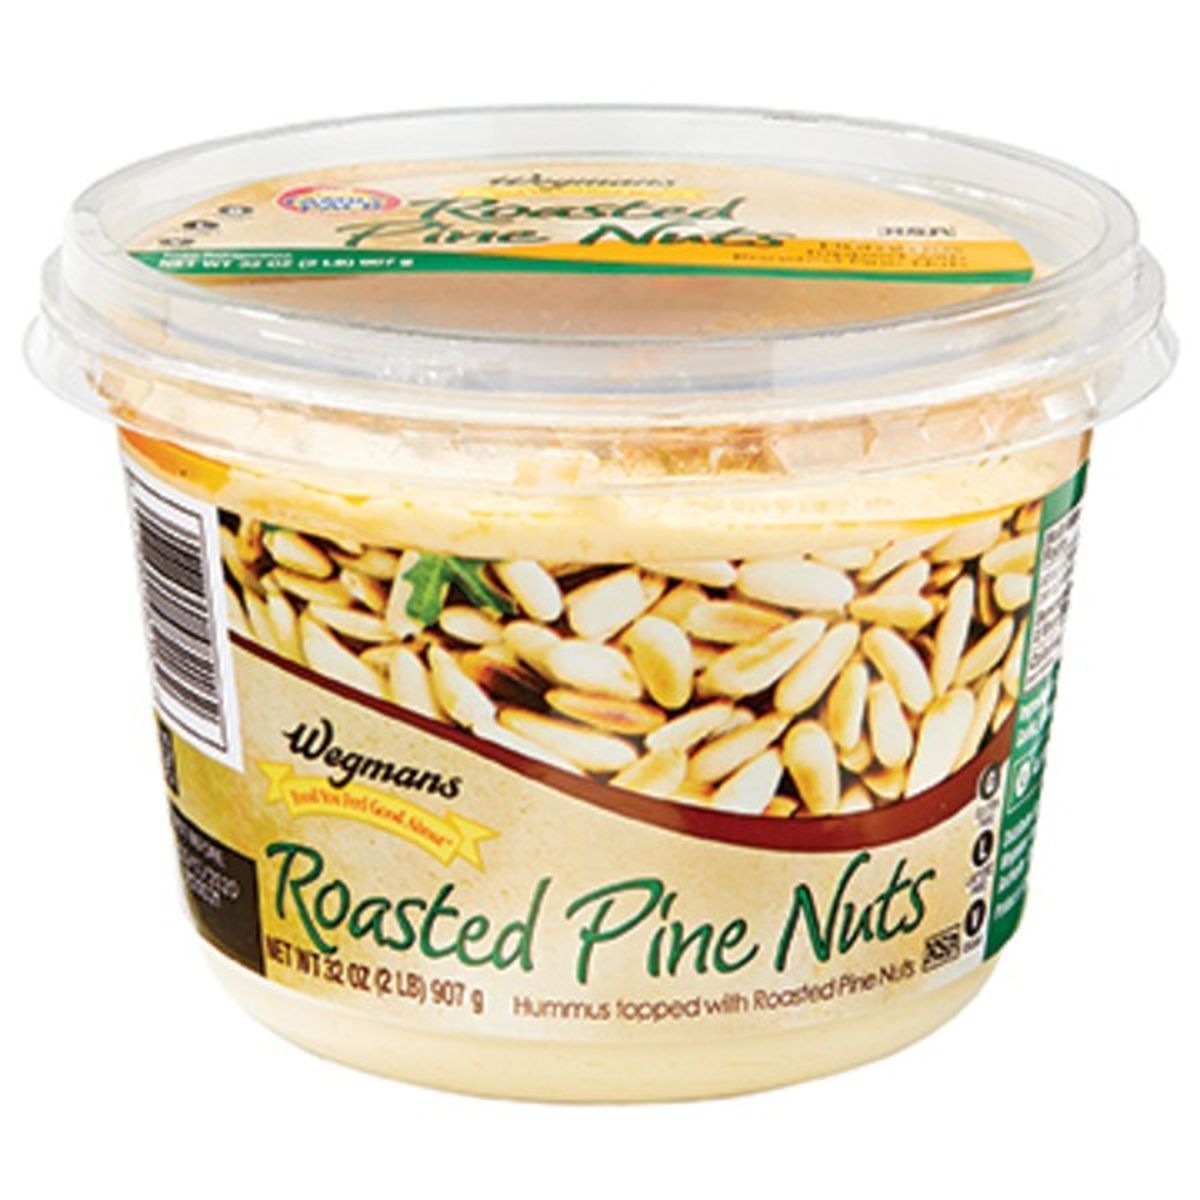 Calories in Wegmans Original Hummus Topped with Roasted Pine Nuts, FAMILY PACK